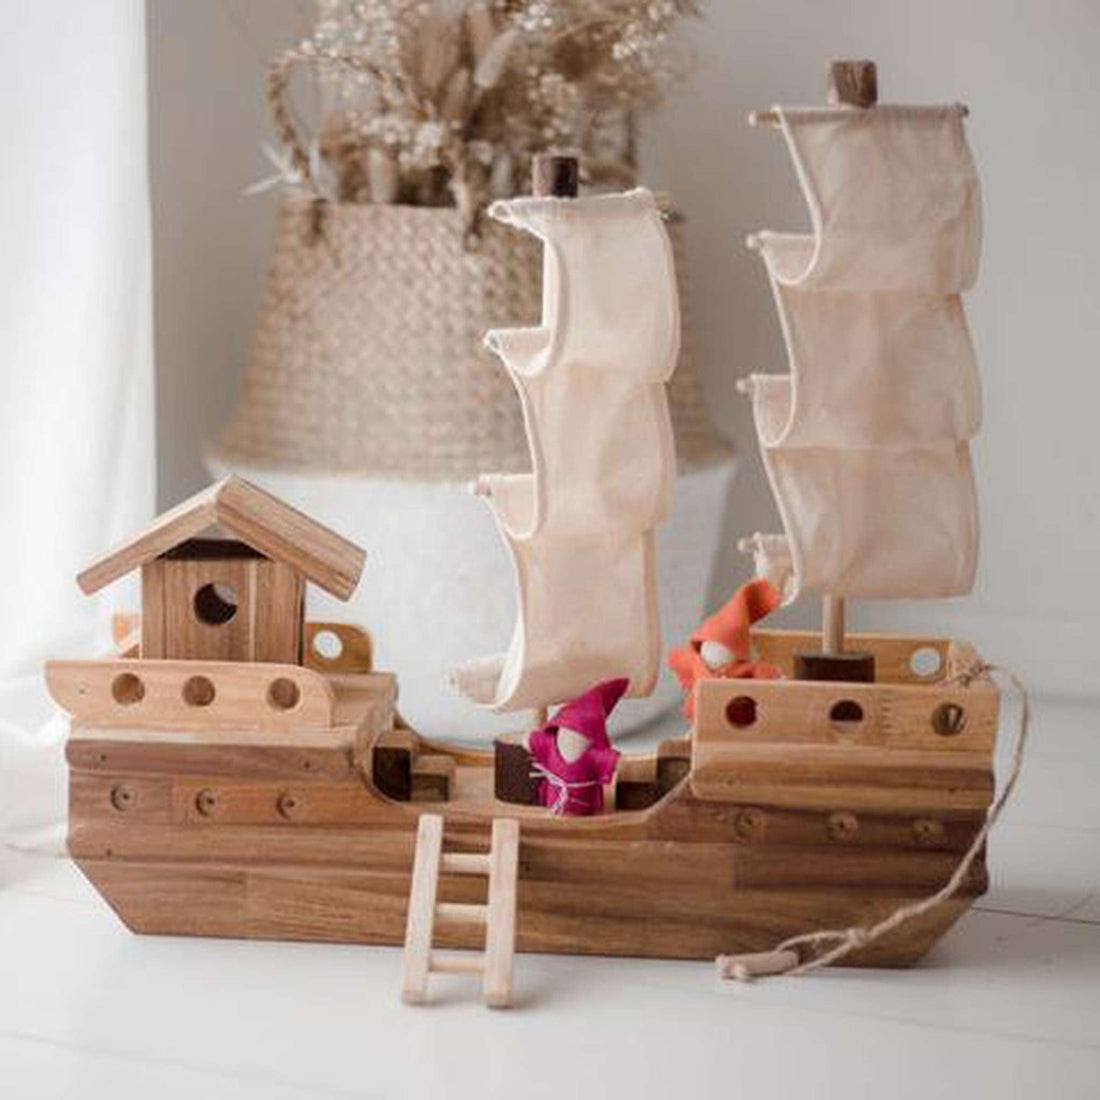 qtoys wooden pirate ship wood toy with gnomes